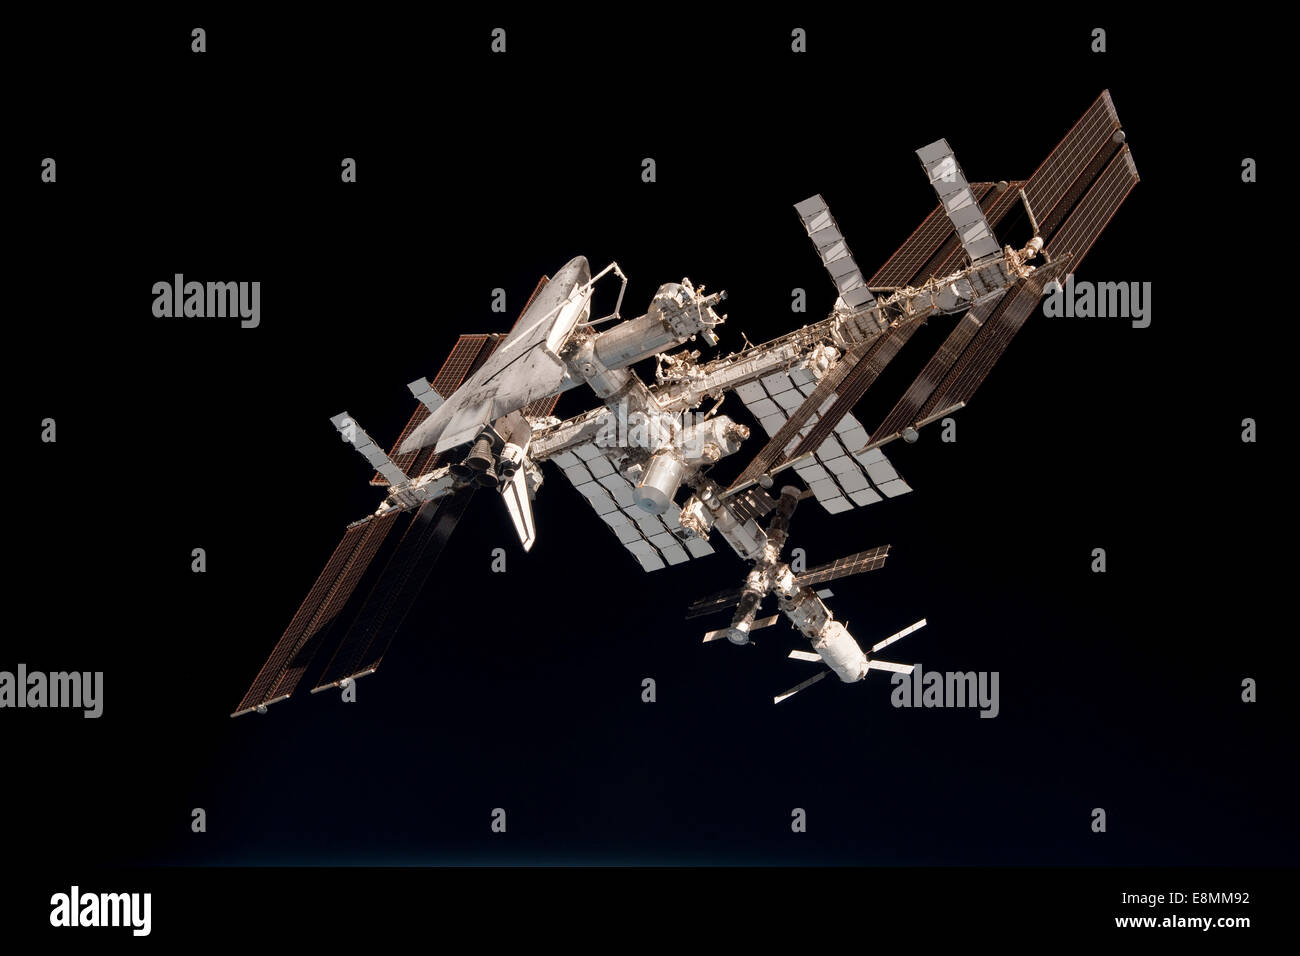 May 23 2011 The International Space Station And Docked Space Shuttle